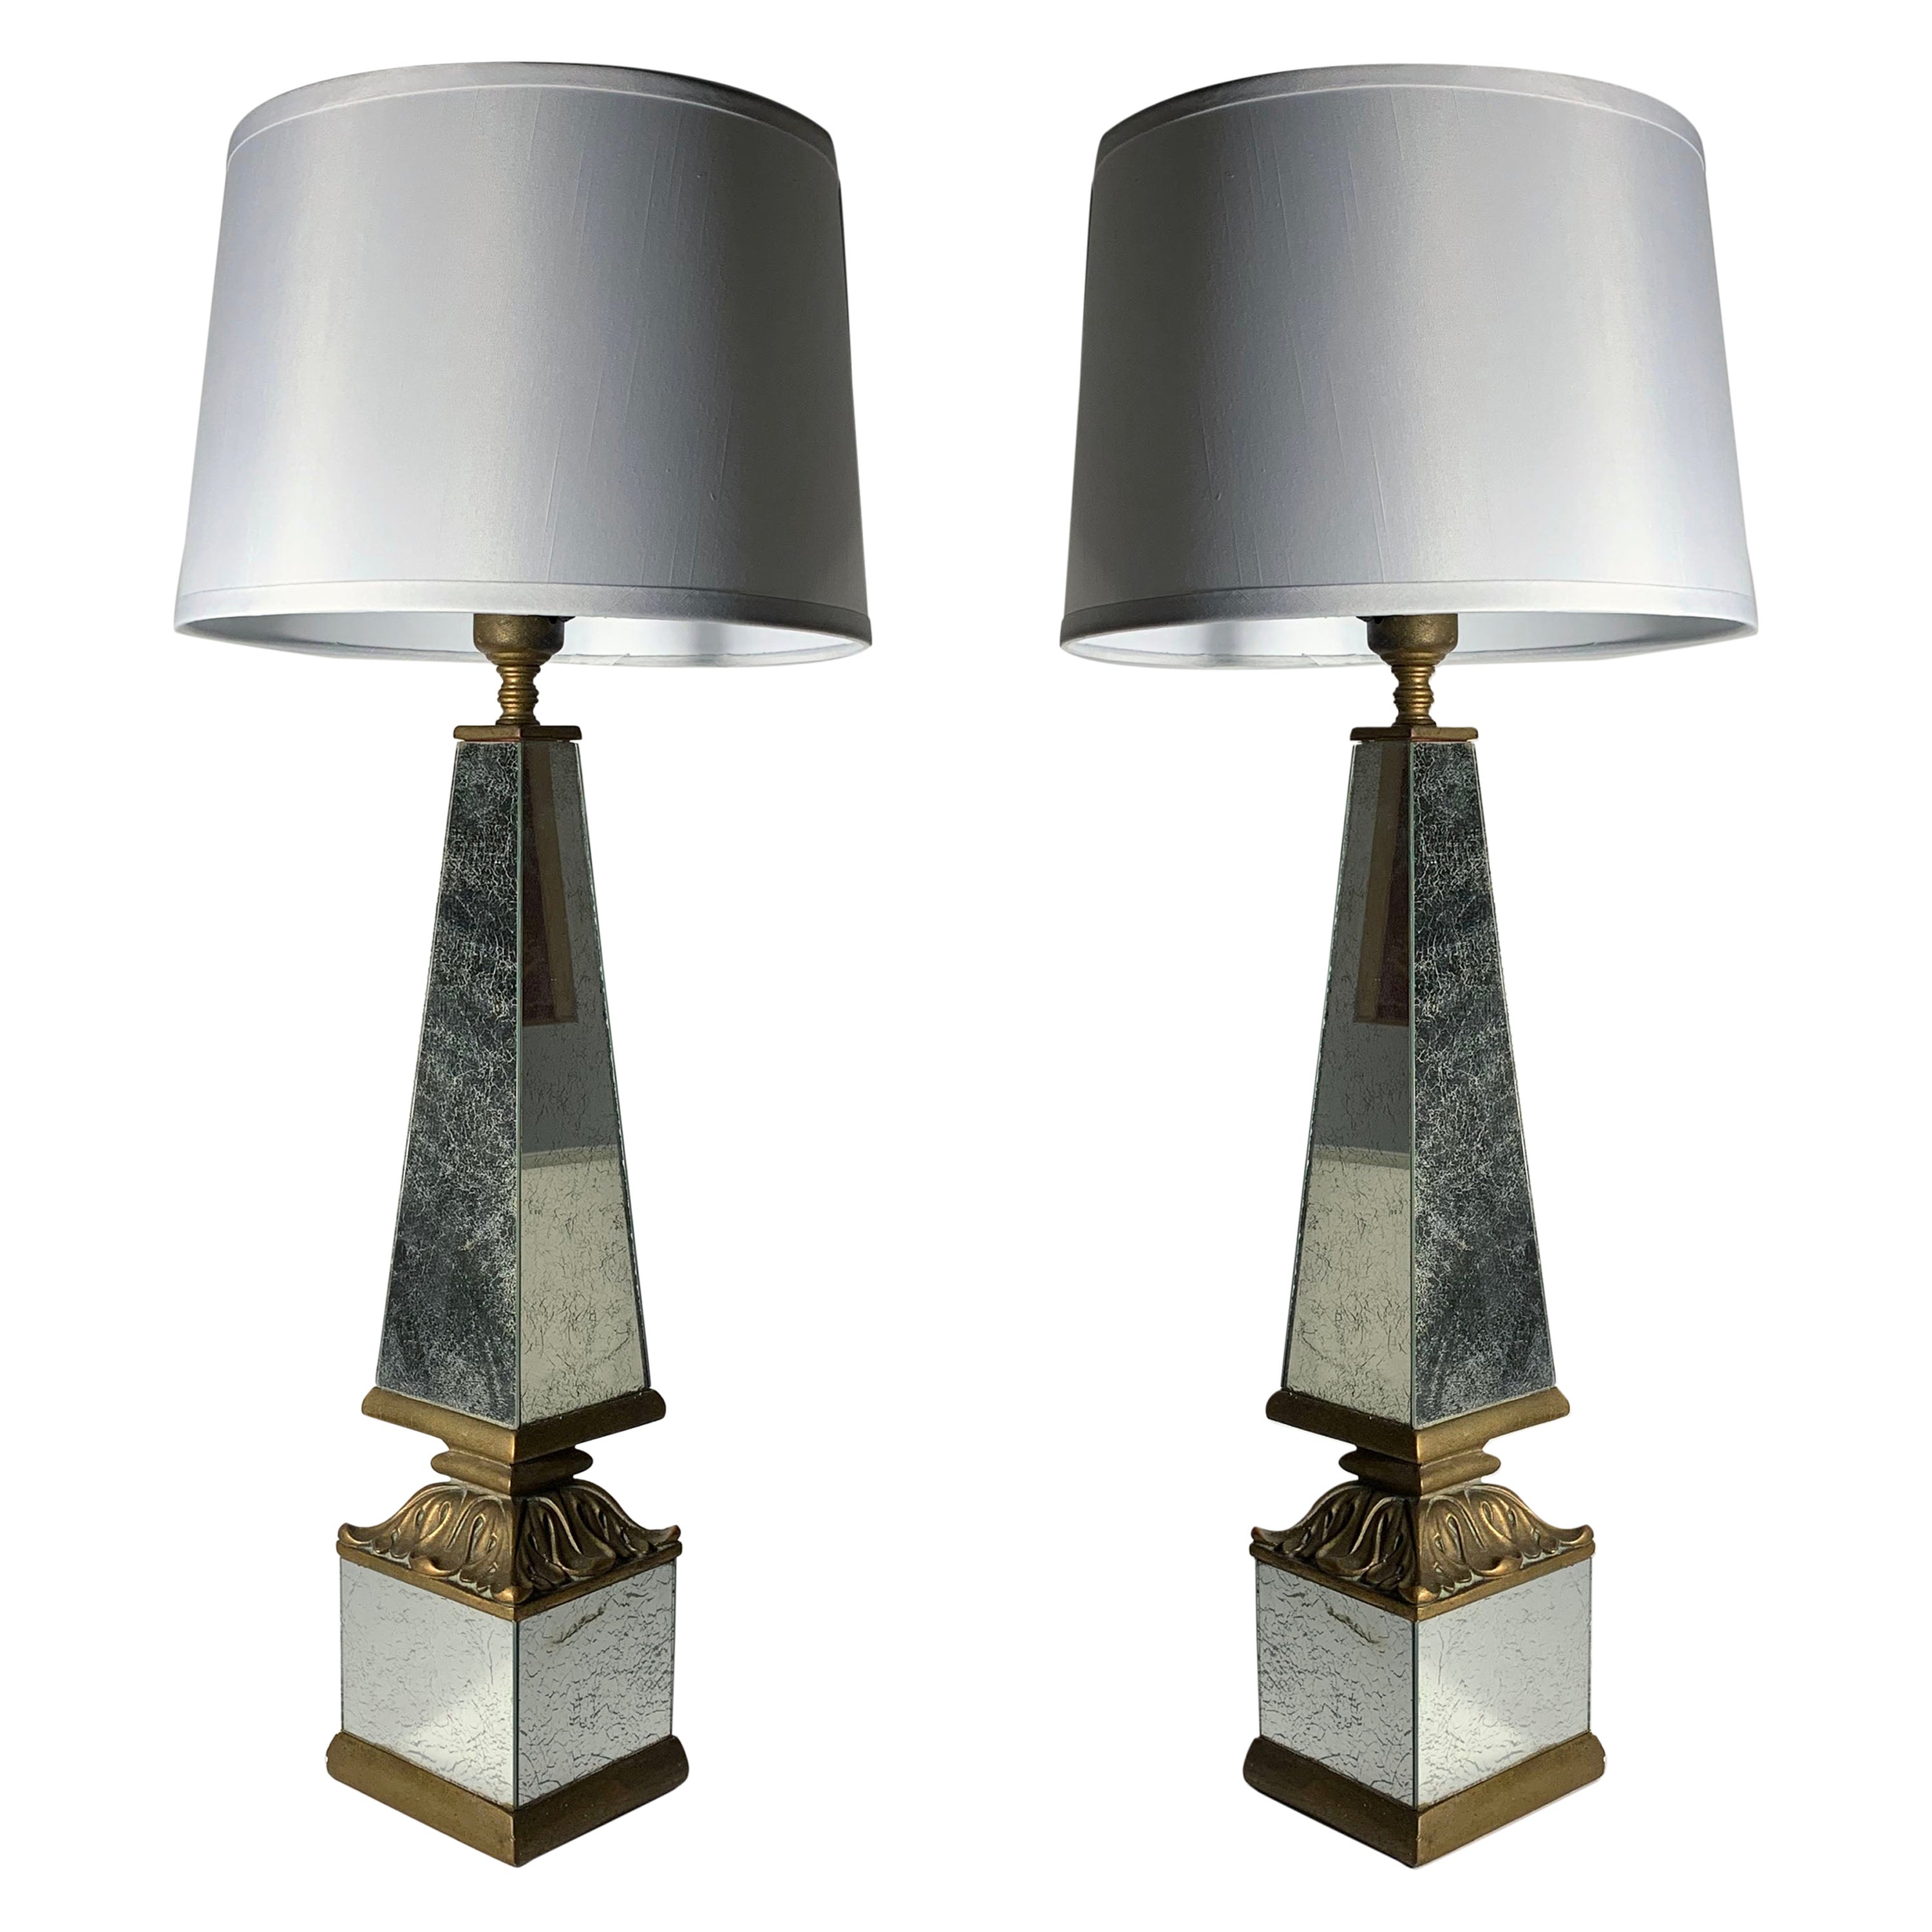 Pair of 1940s Hollywood Regency Mirrored Obelisk Form Table Lamps